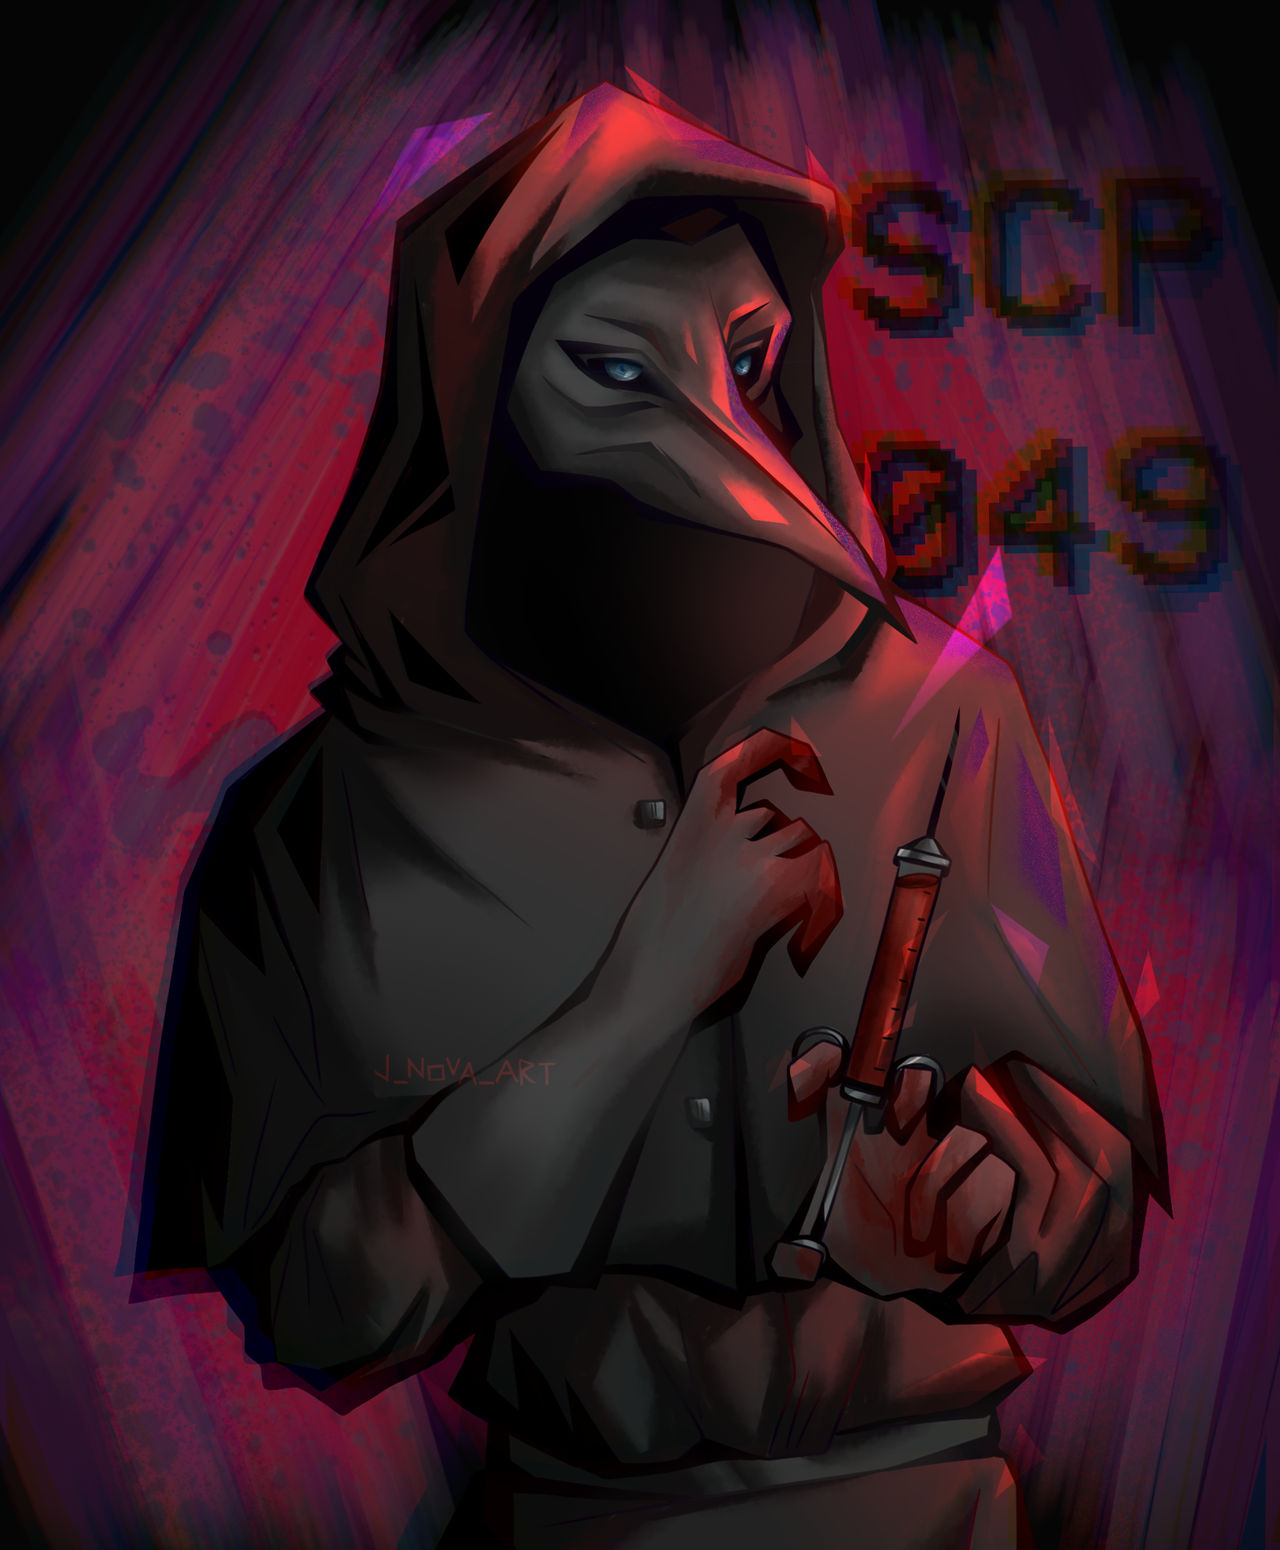 SCP Wallpaper (NEW) by Fxll9w on DeviantArt